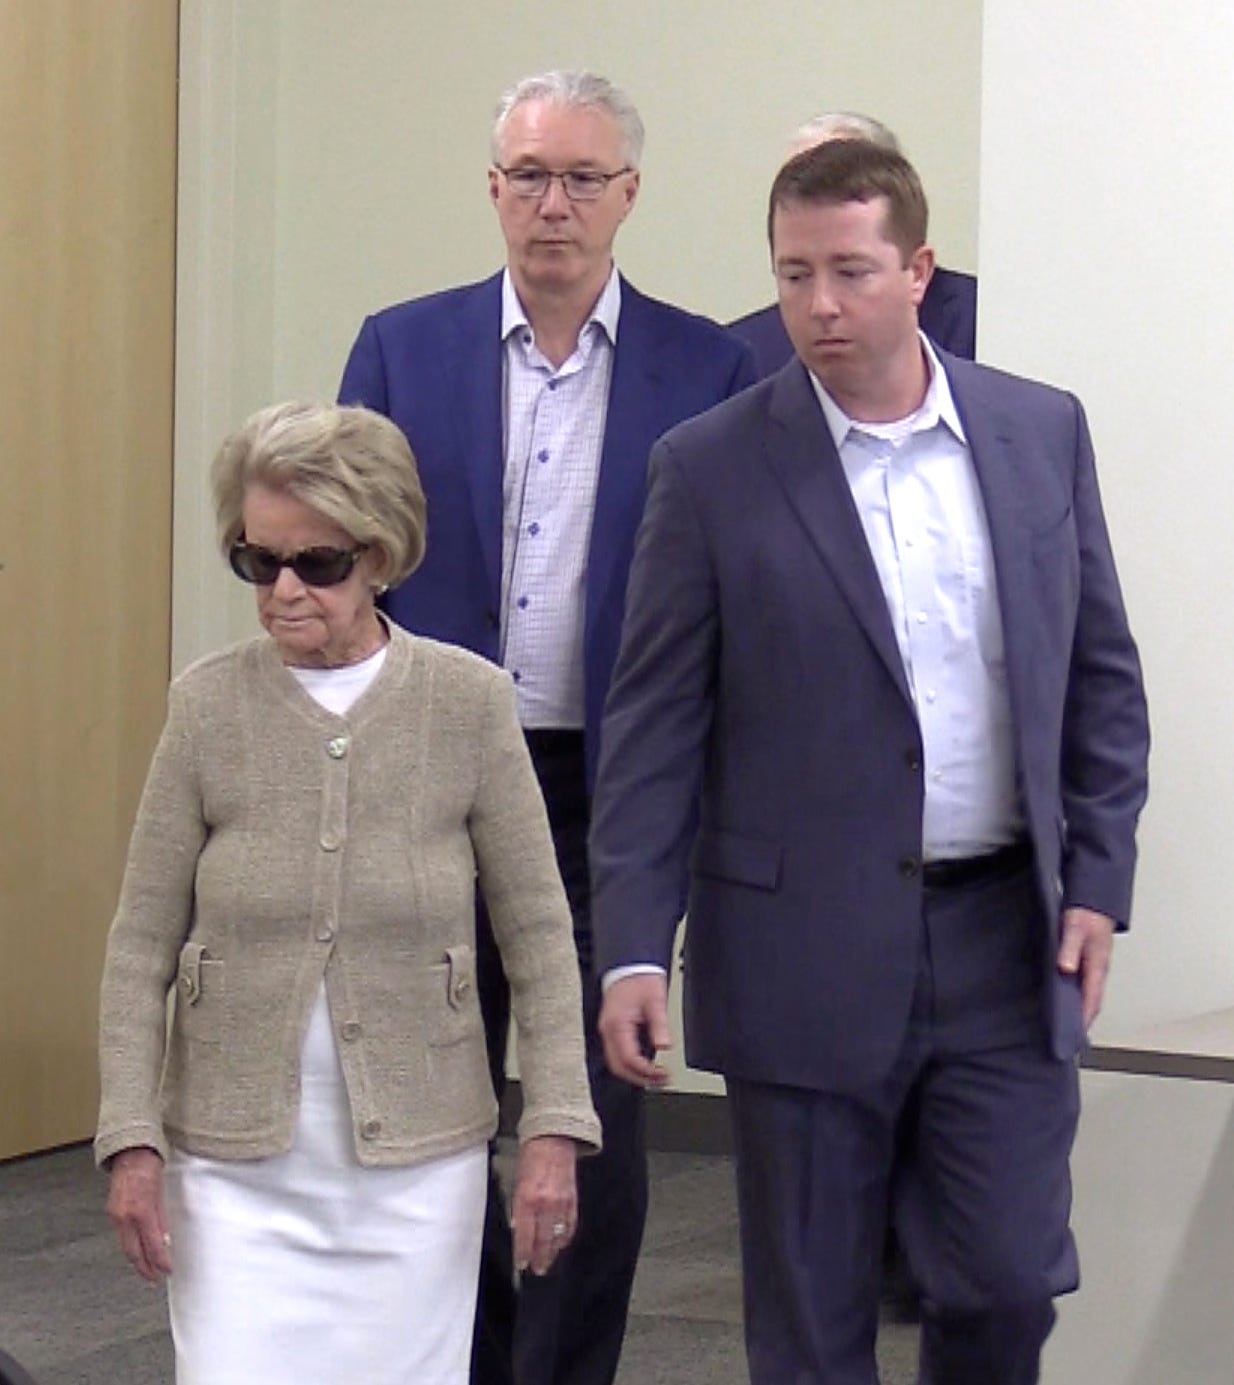 Detroit Lions owner and chairman Martha Firestone Ford, Team President Rod Wood and Executive Vice President & General Manager Bob Quinn arrive for the press conference.   Detroit Lions head coach Matt Patricia press conference, concerning indicted but not tried in 1996 sex assault, at training facility in Allen Park, Michigan on May 10, 2018.  (Image by Daniel Mears / The Detroit News).